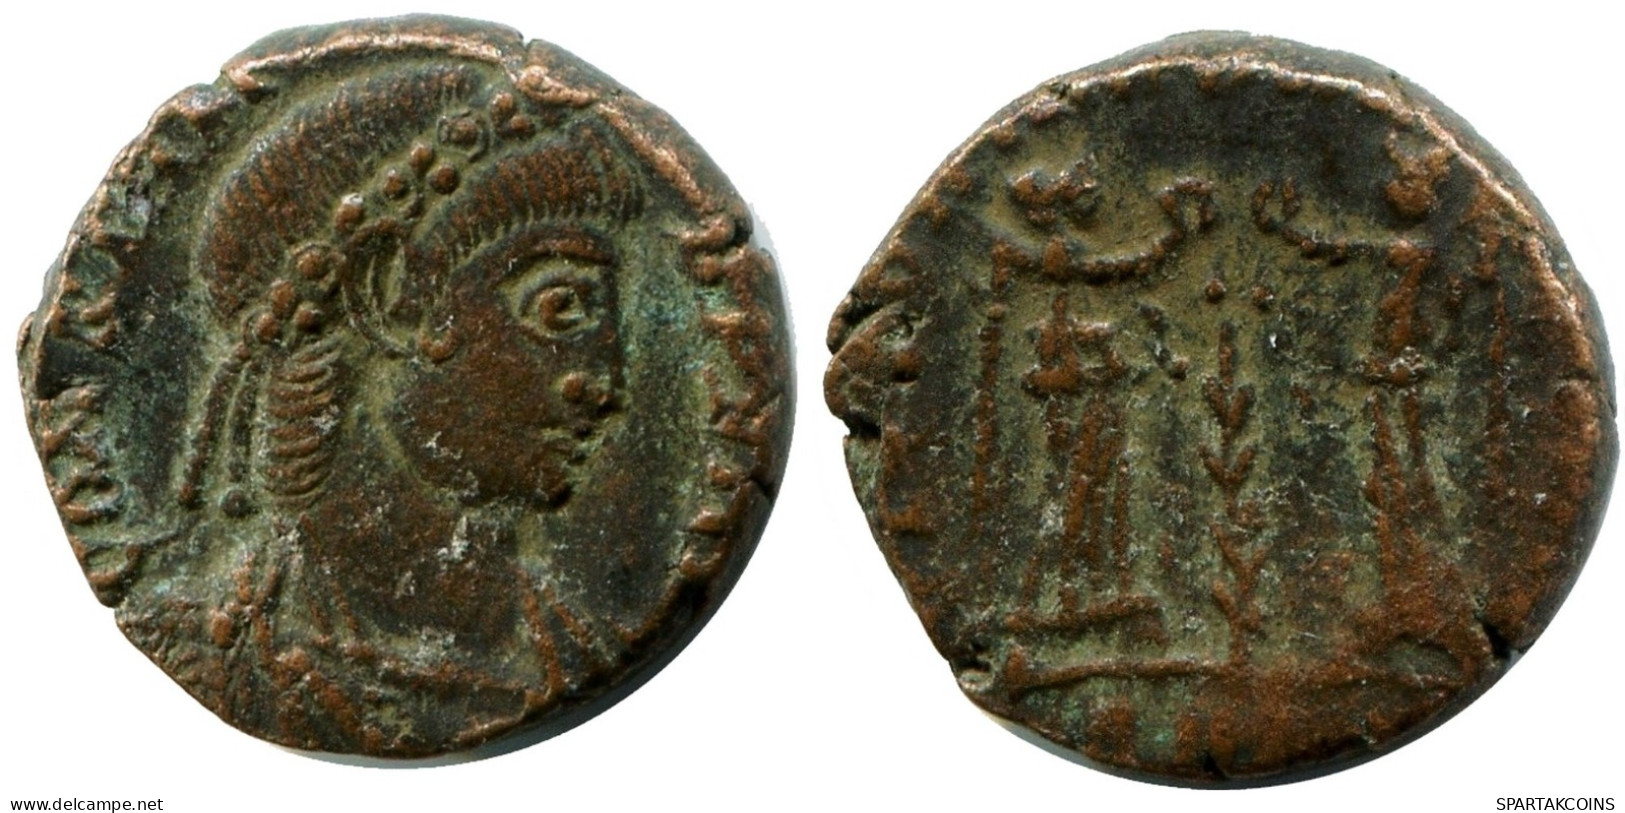 CONSTANS MINTED IN ROME ITALY FROM THE ROYAL ONTARIO MUSEUM #ANC11503.14.U.A - L'Empire Chrétien (307 à 363)